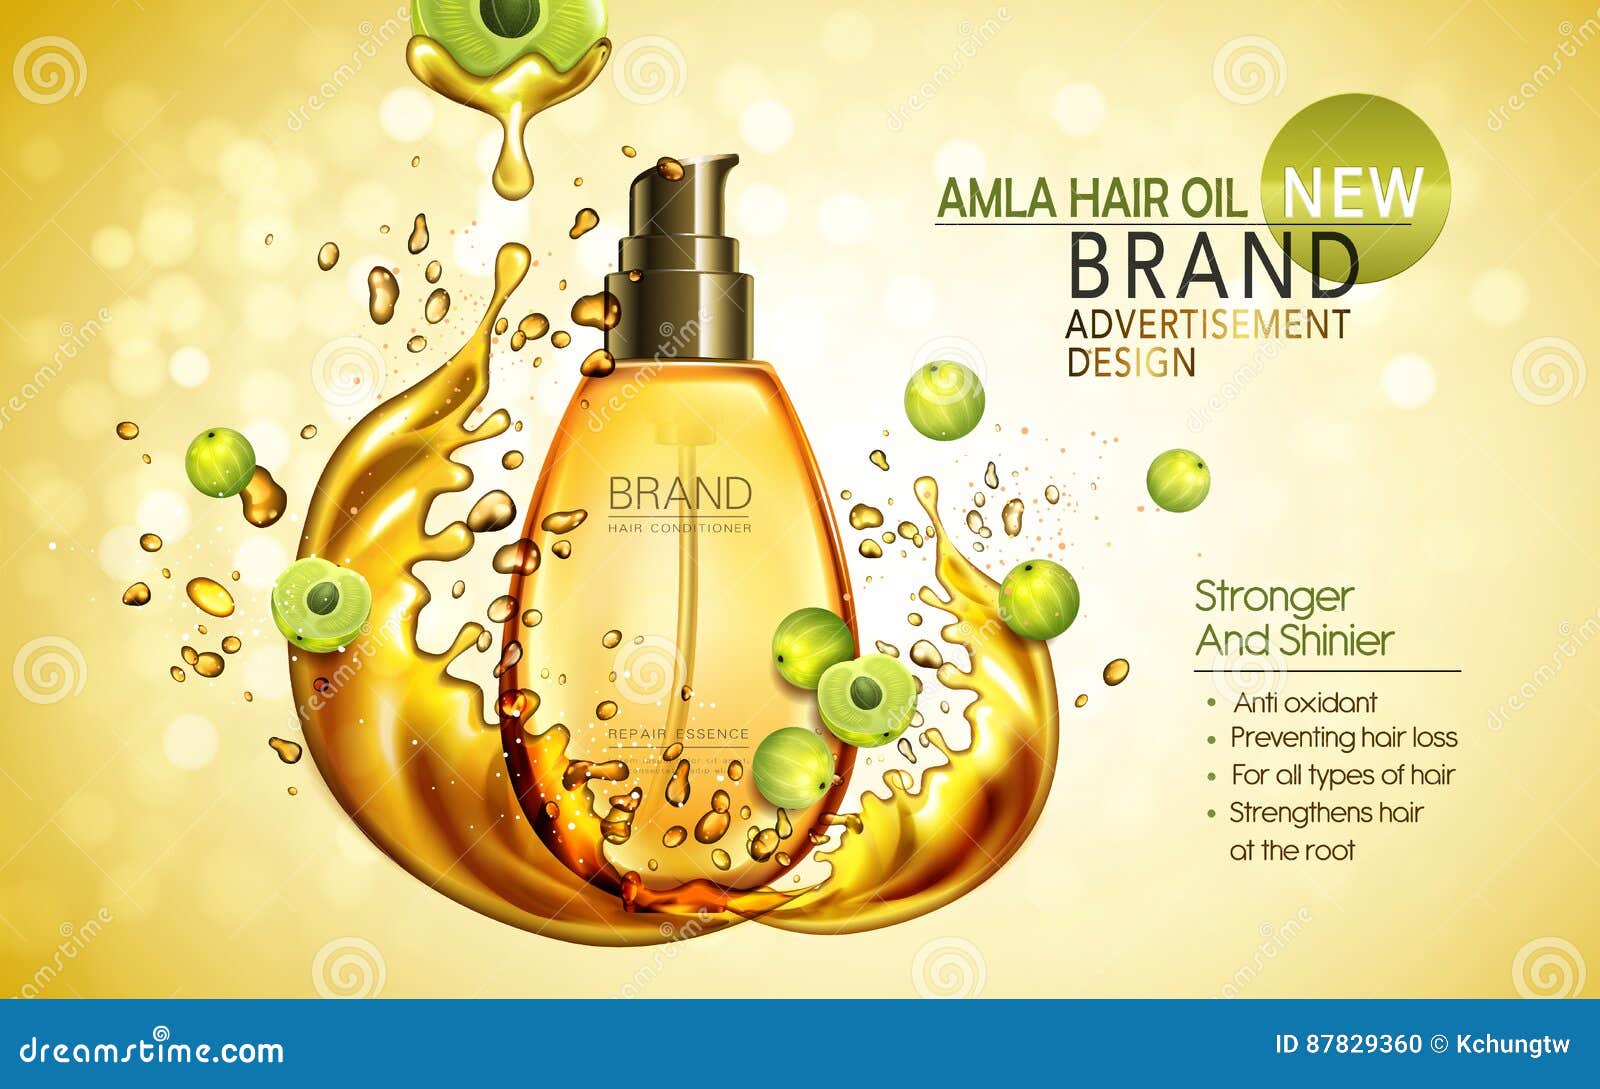 2194 Hair Oil Poster Images Stock Photos  Vectors  Shutterstock